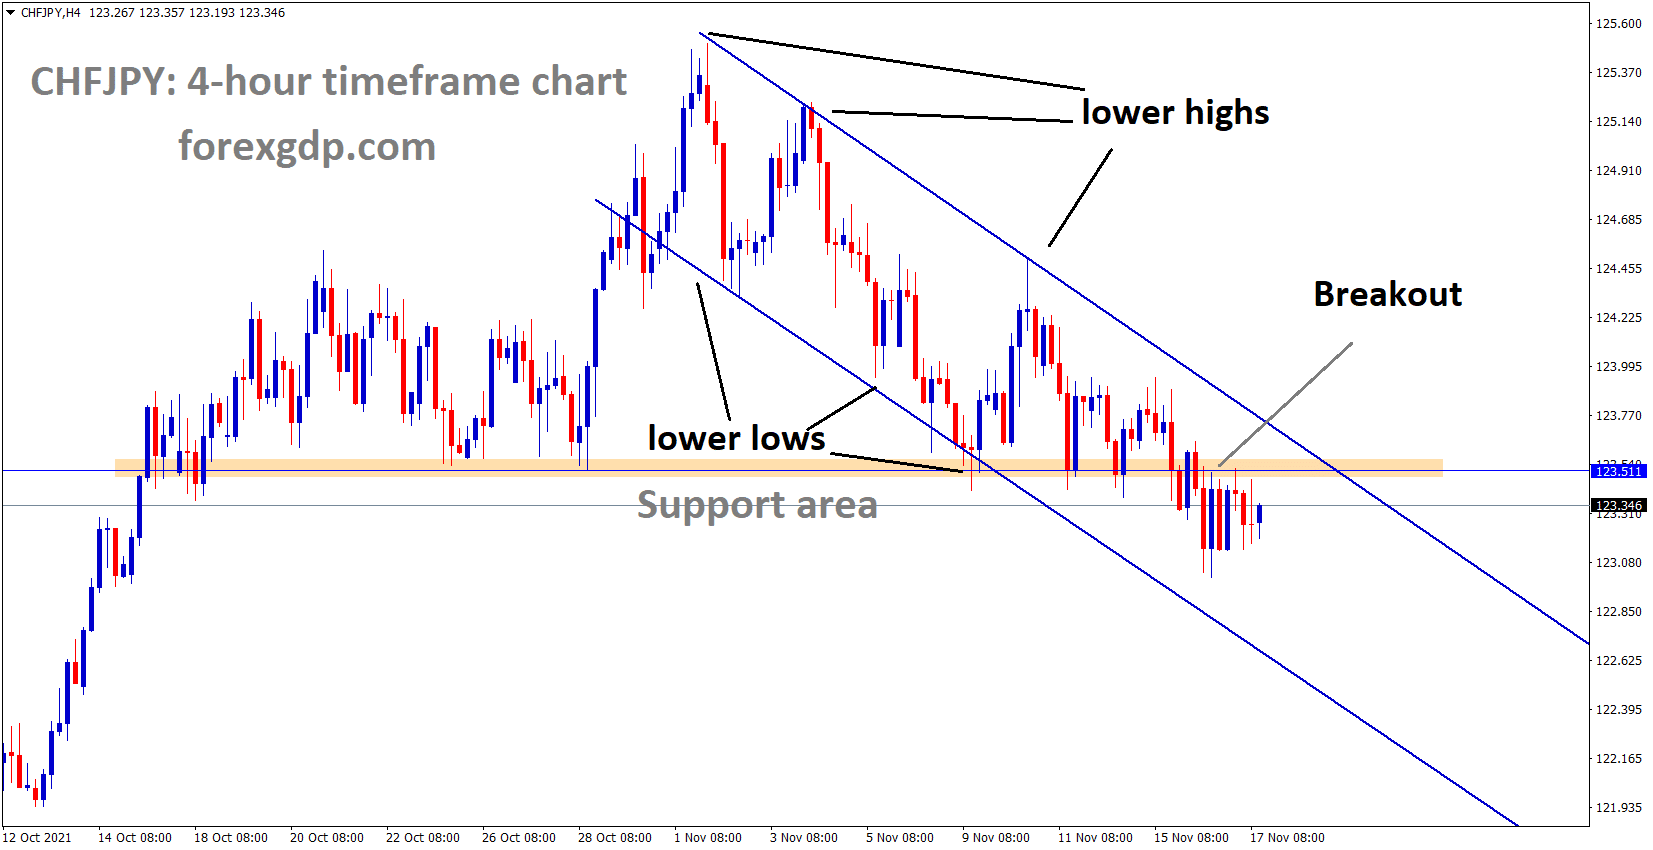 CHFJPY is moving in the Descending channel and has broken the major horizontal support area